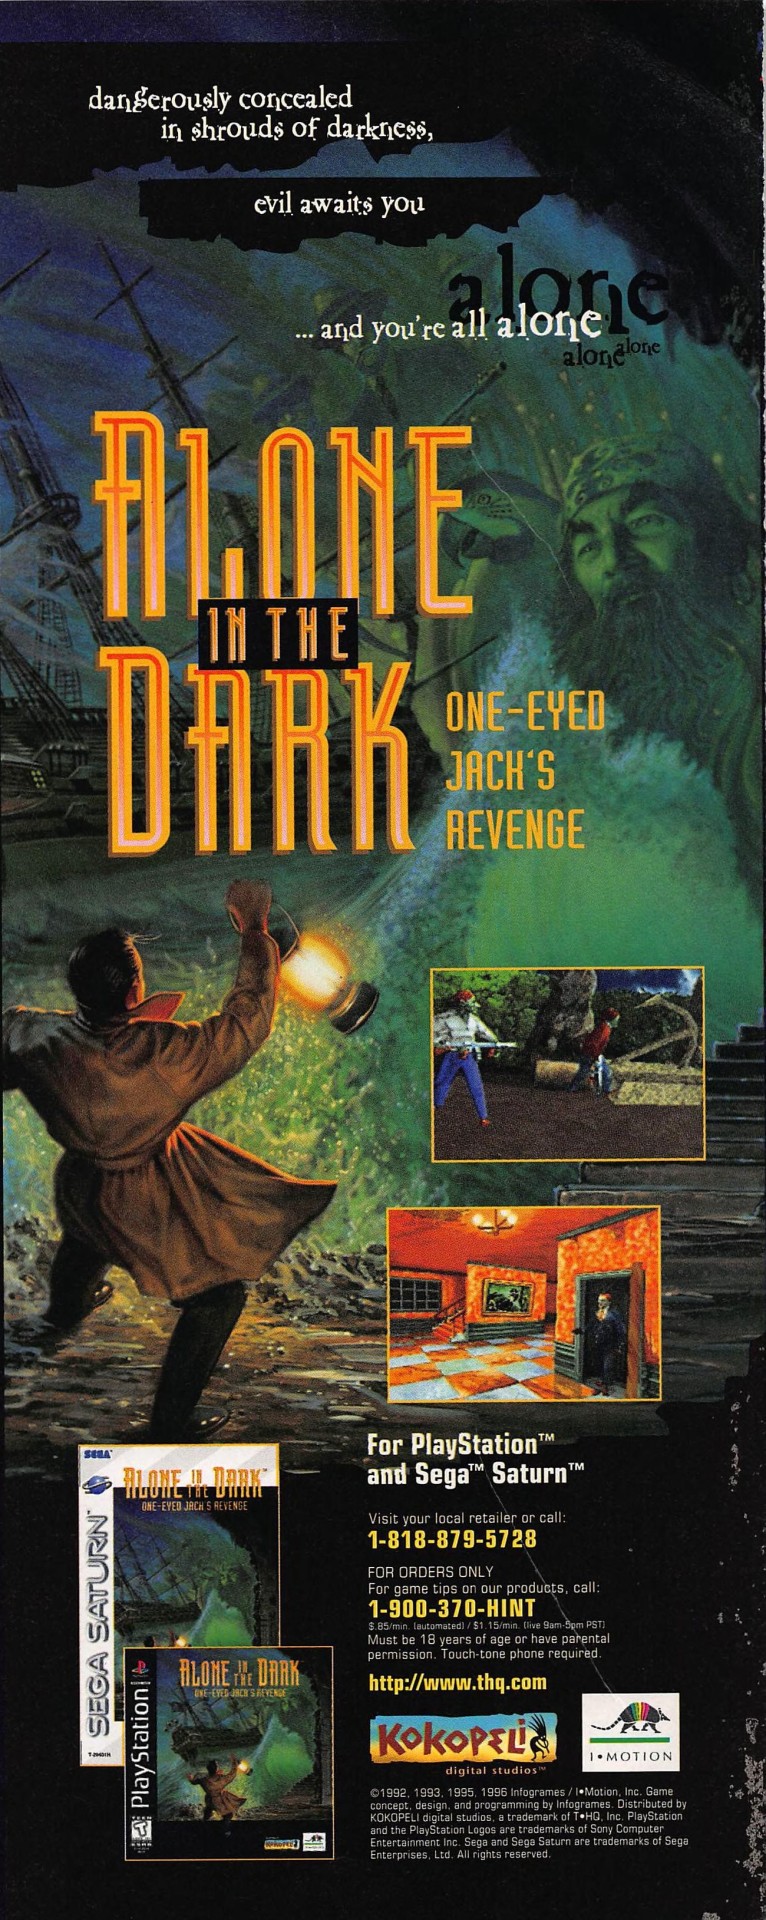 ‘Alone in the Dark: One-Eyed Jack’s Revenge’
[aka: ‘Alone in the Dark 2′][PS1 / SAT] [USA] [MAGAZINE, BANNER] [1996]
““The original game’s horror theme has been significantly de-emphasized in the sequel. While there are some supernatural goings-on...